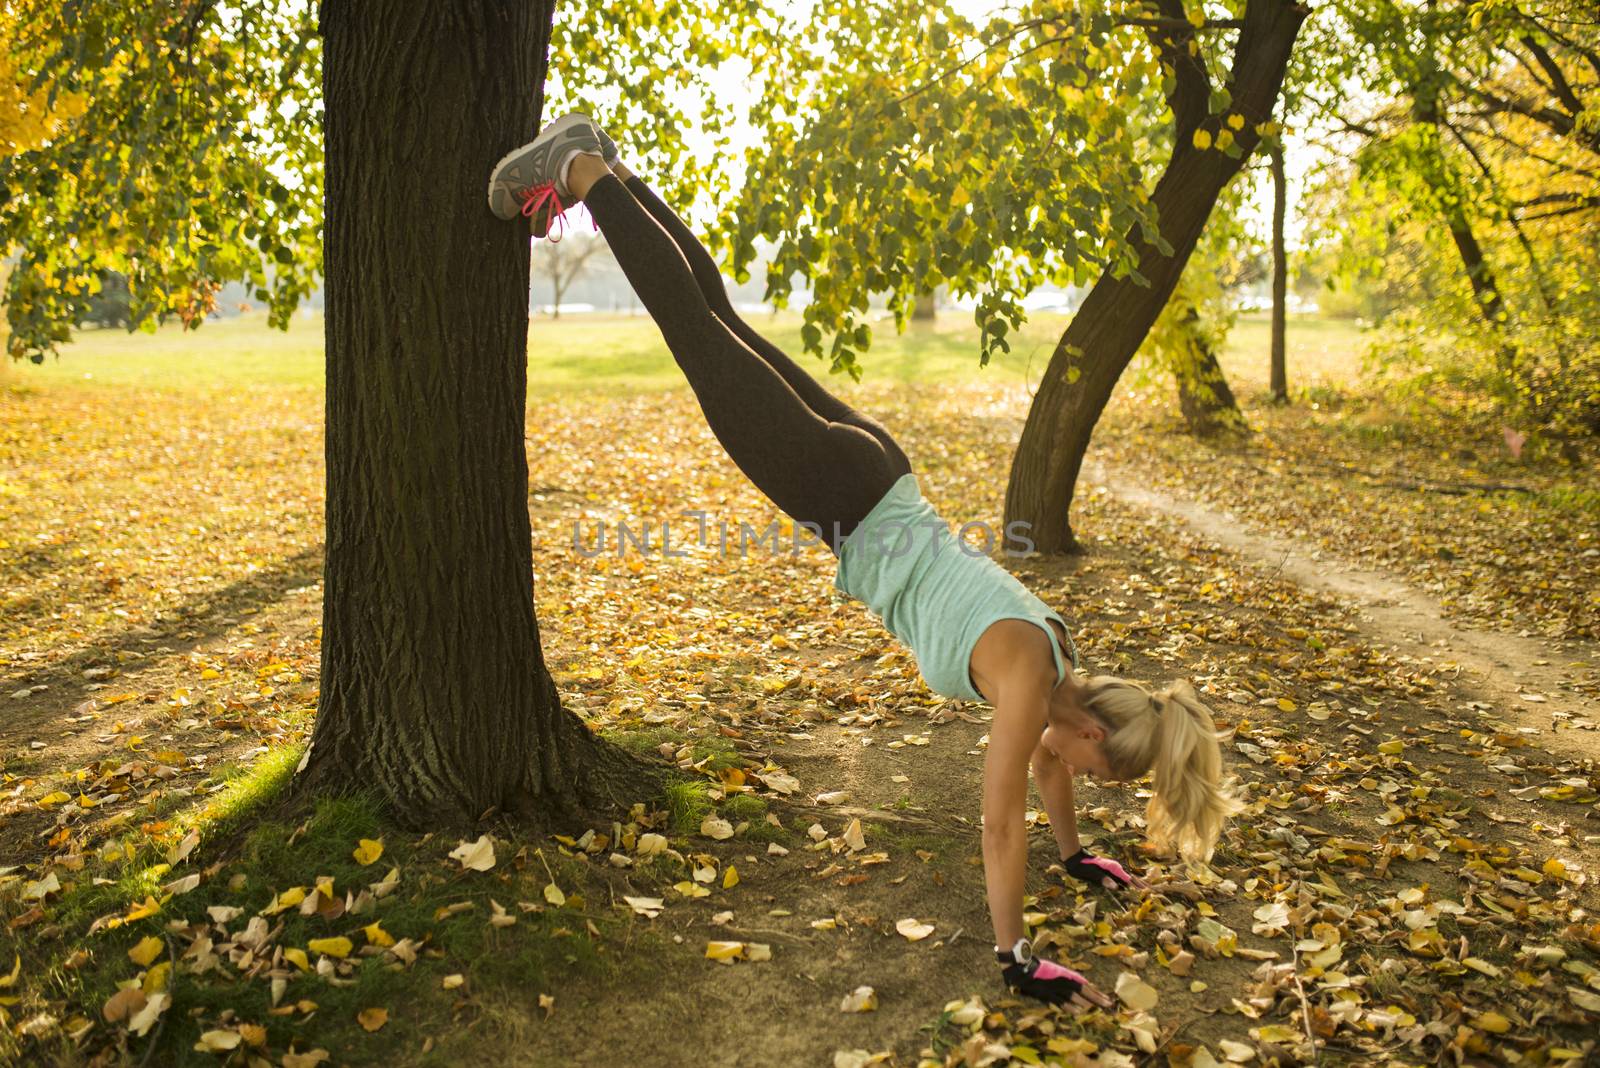 Attractive female athlete exercising in the public park covered with yellow leaves lawn to the tree. Healthy lifestyle concept.